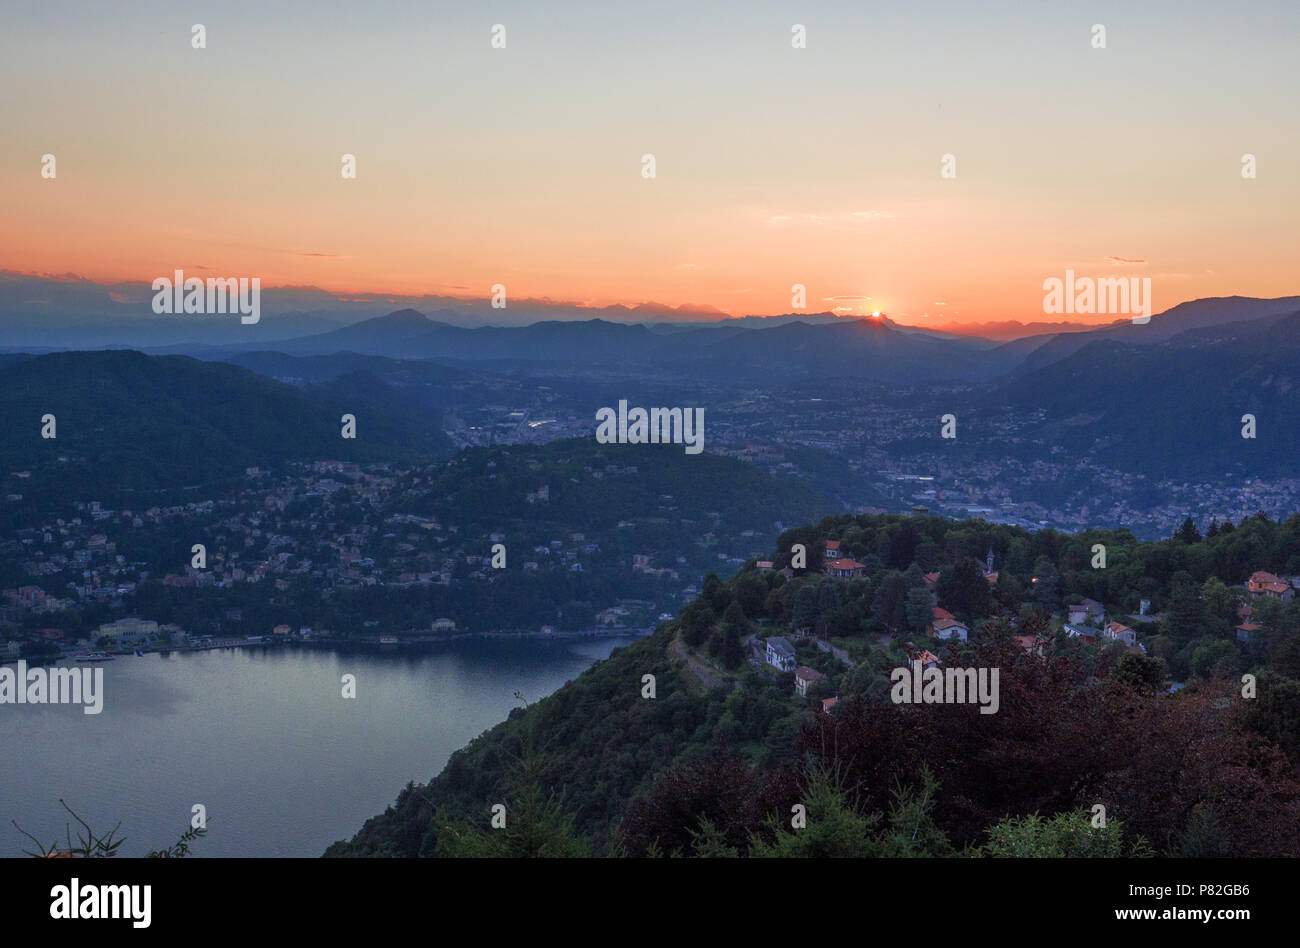 Lake Como at sunset taken from the brunate hill. Lombardy, Italy Stock Photo